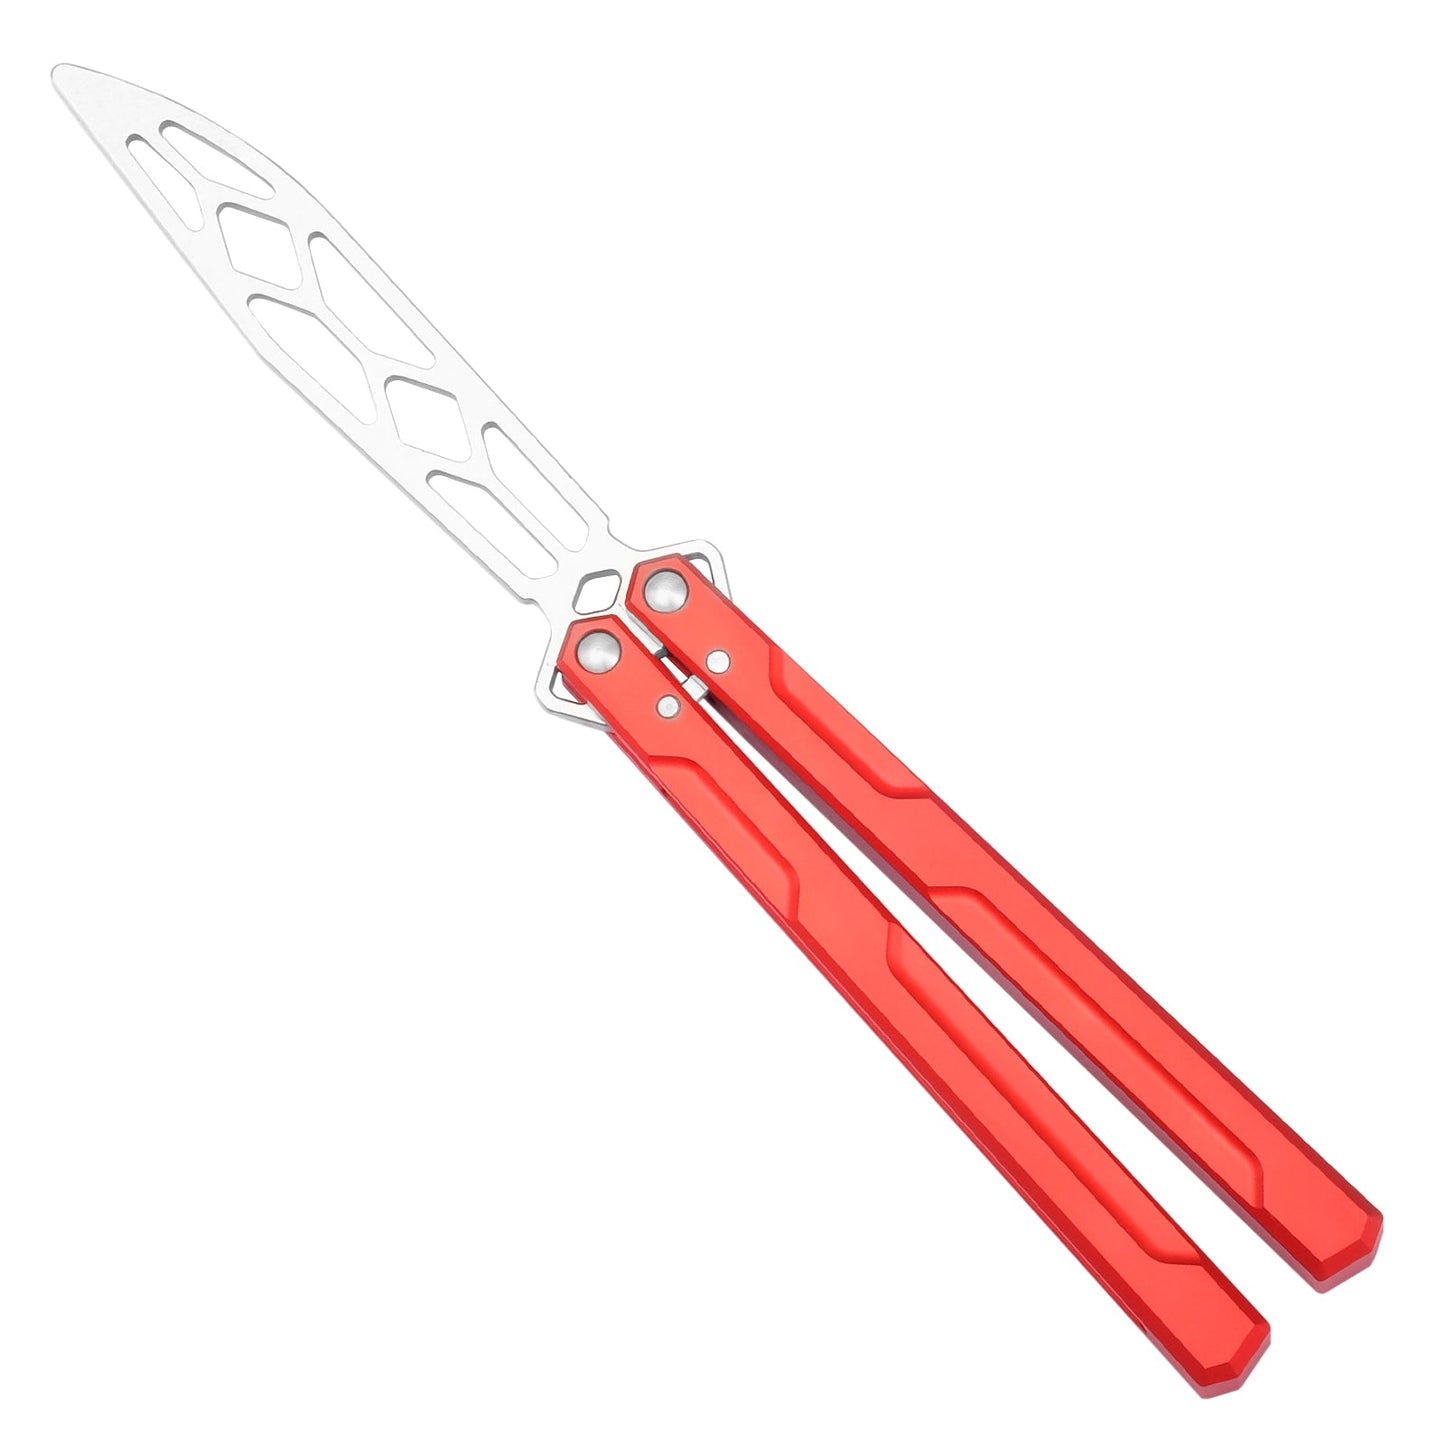 Andux Balisong Butterfly Knife CNC Effective Bushing System Training Tool 6063 Aluminum Lock Free (Red) CNC-601